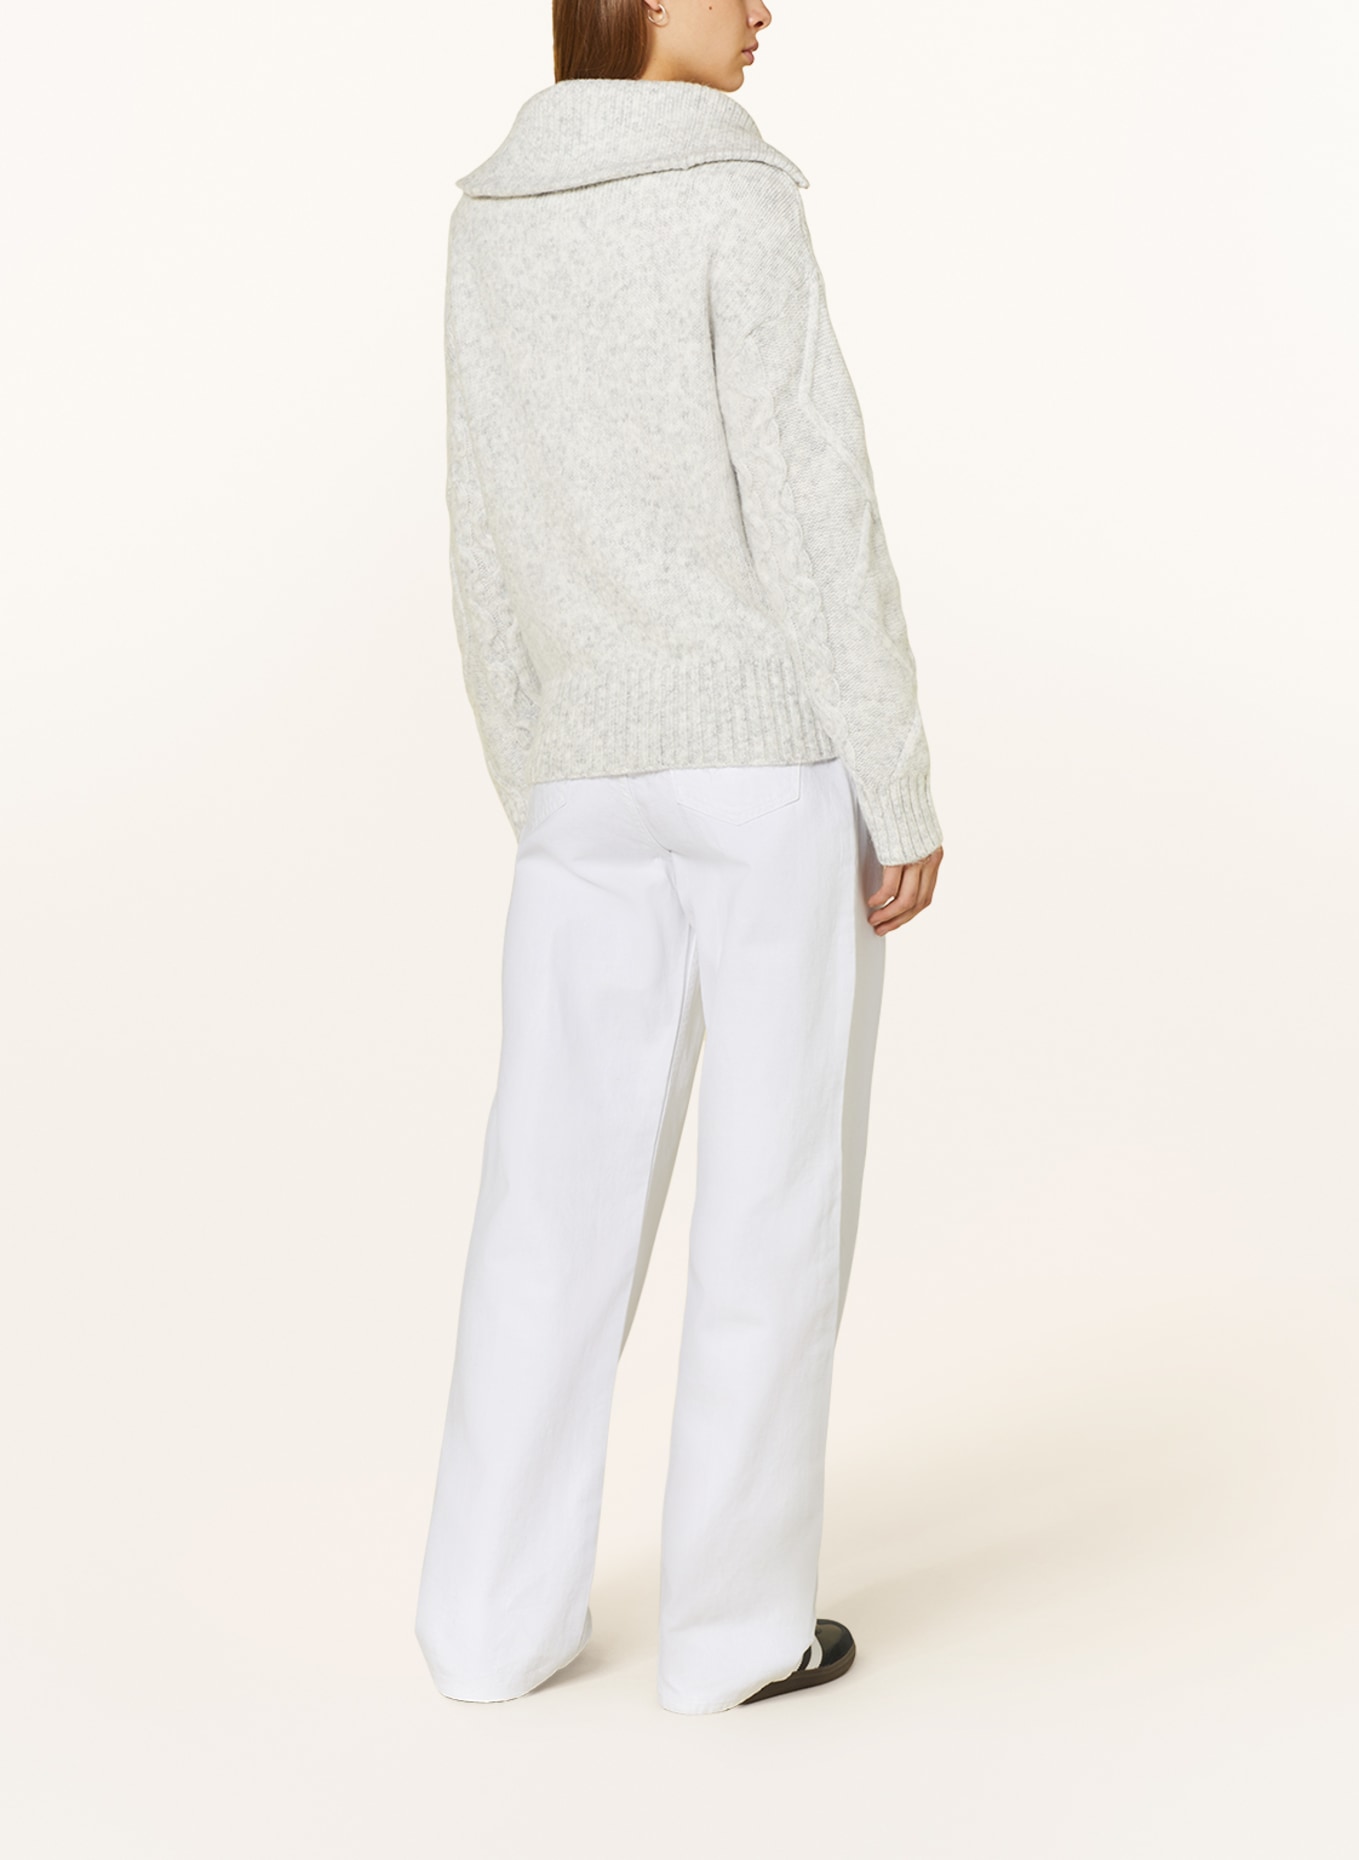 gina tricot Half-zip sweater, Color: LIGHT GRAY (Image 3)